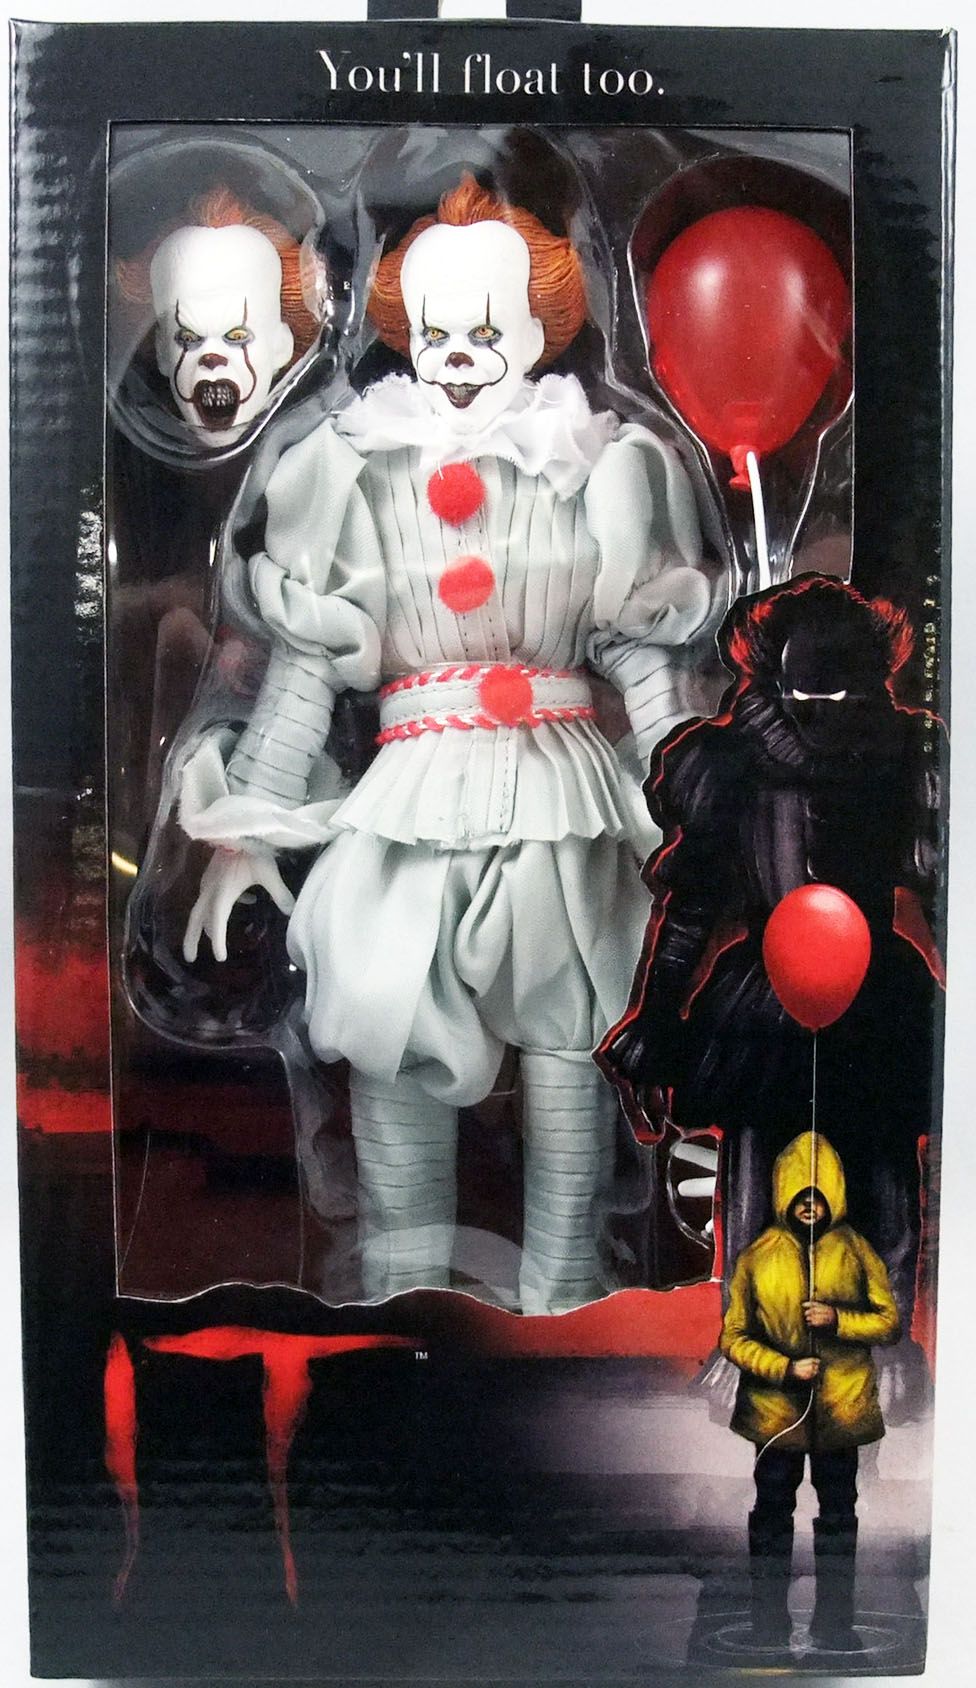 pennywise it figure